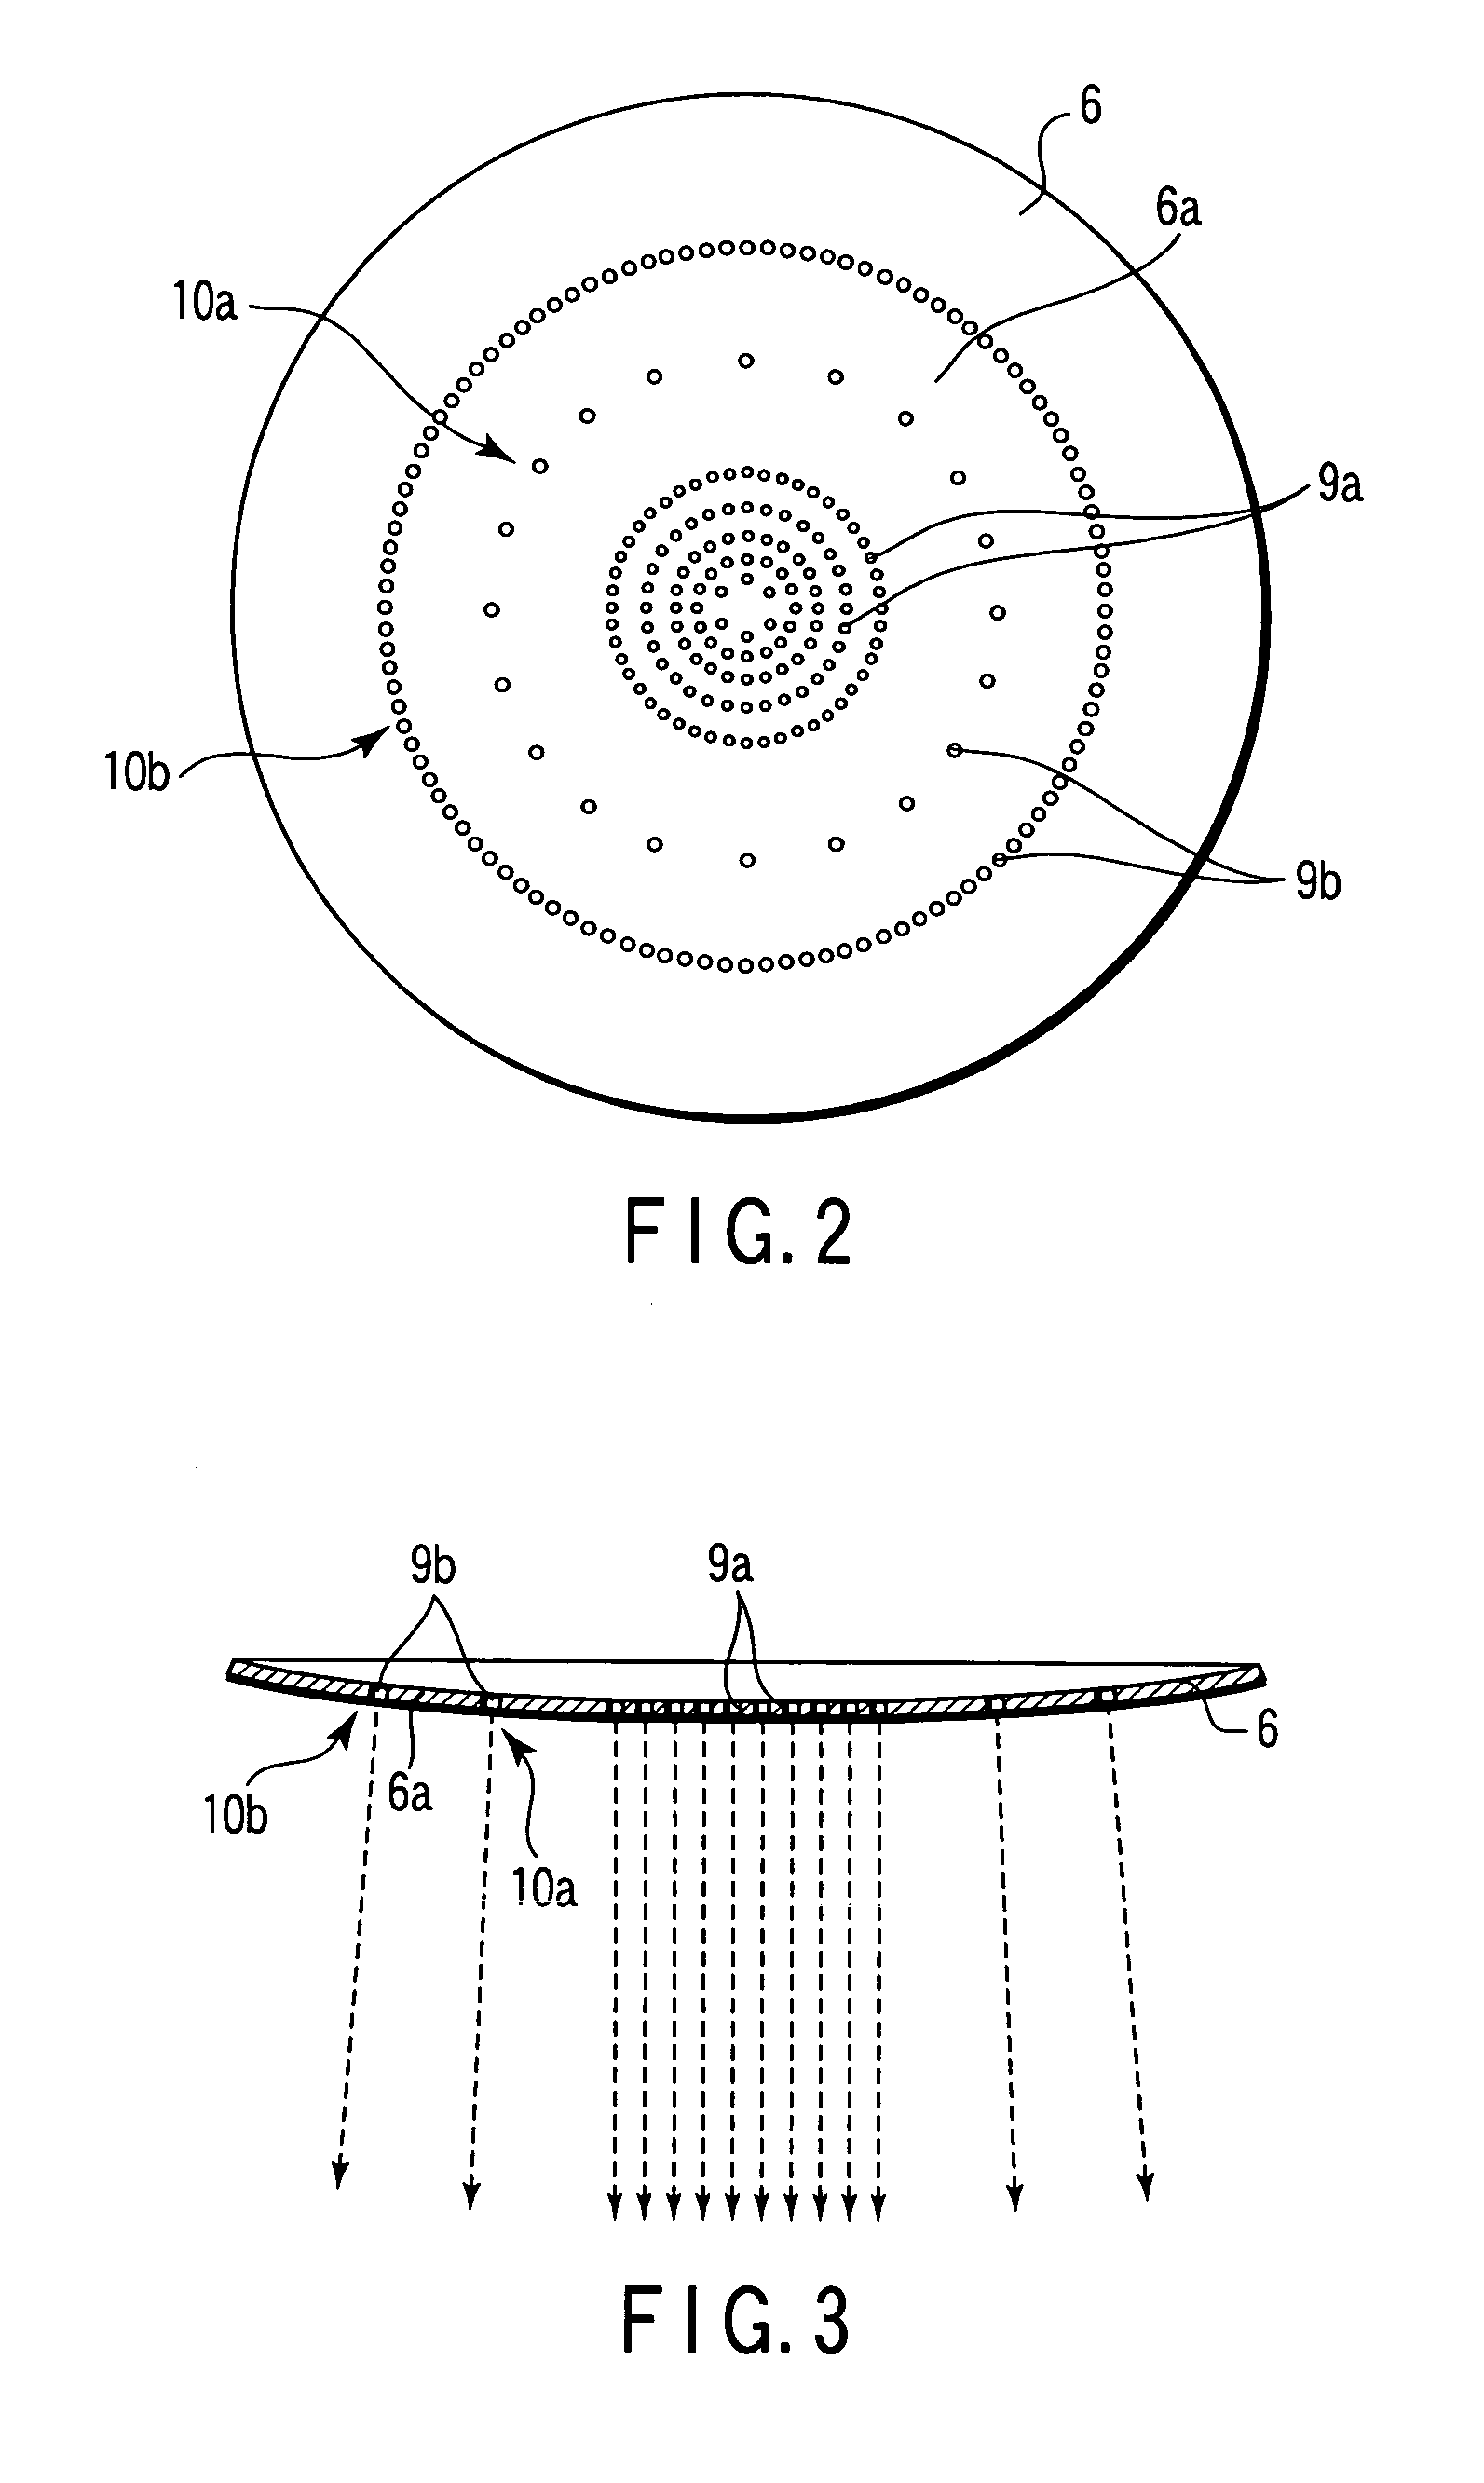 Water spray plate and shower head